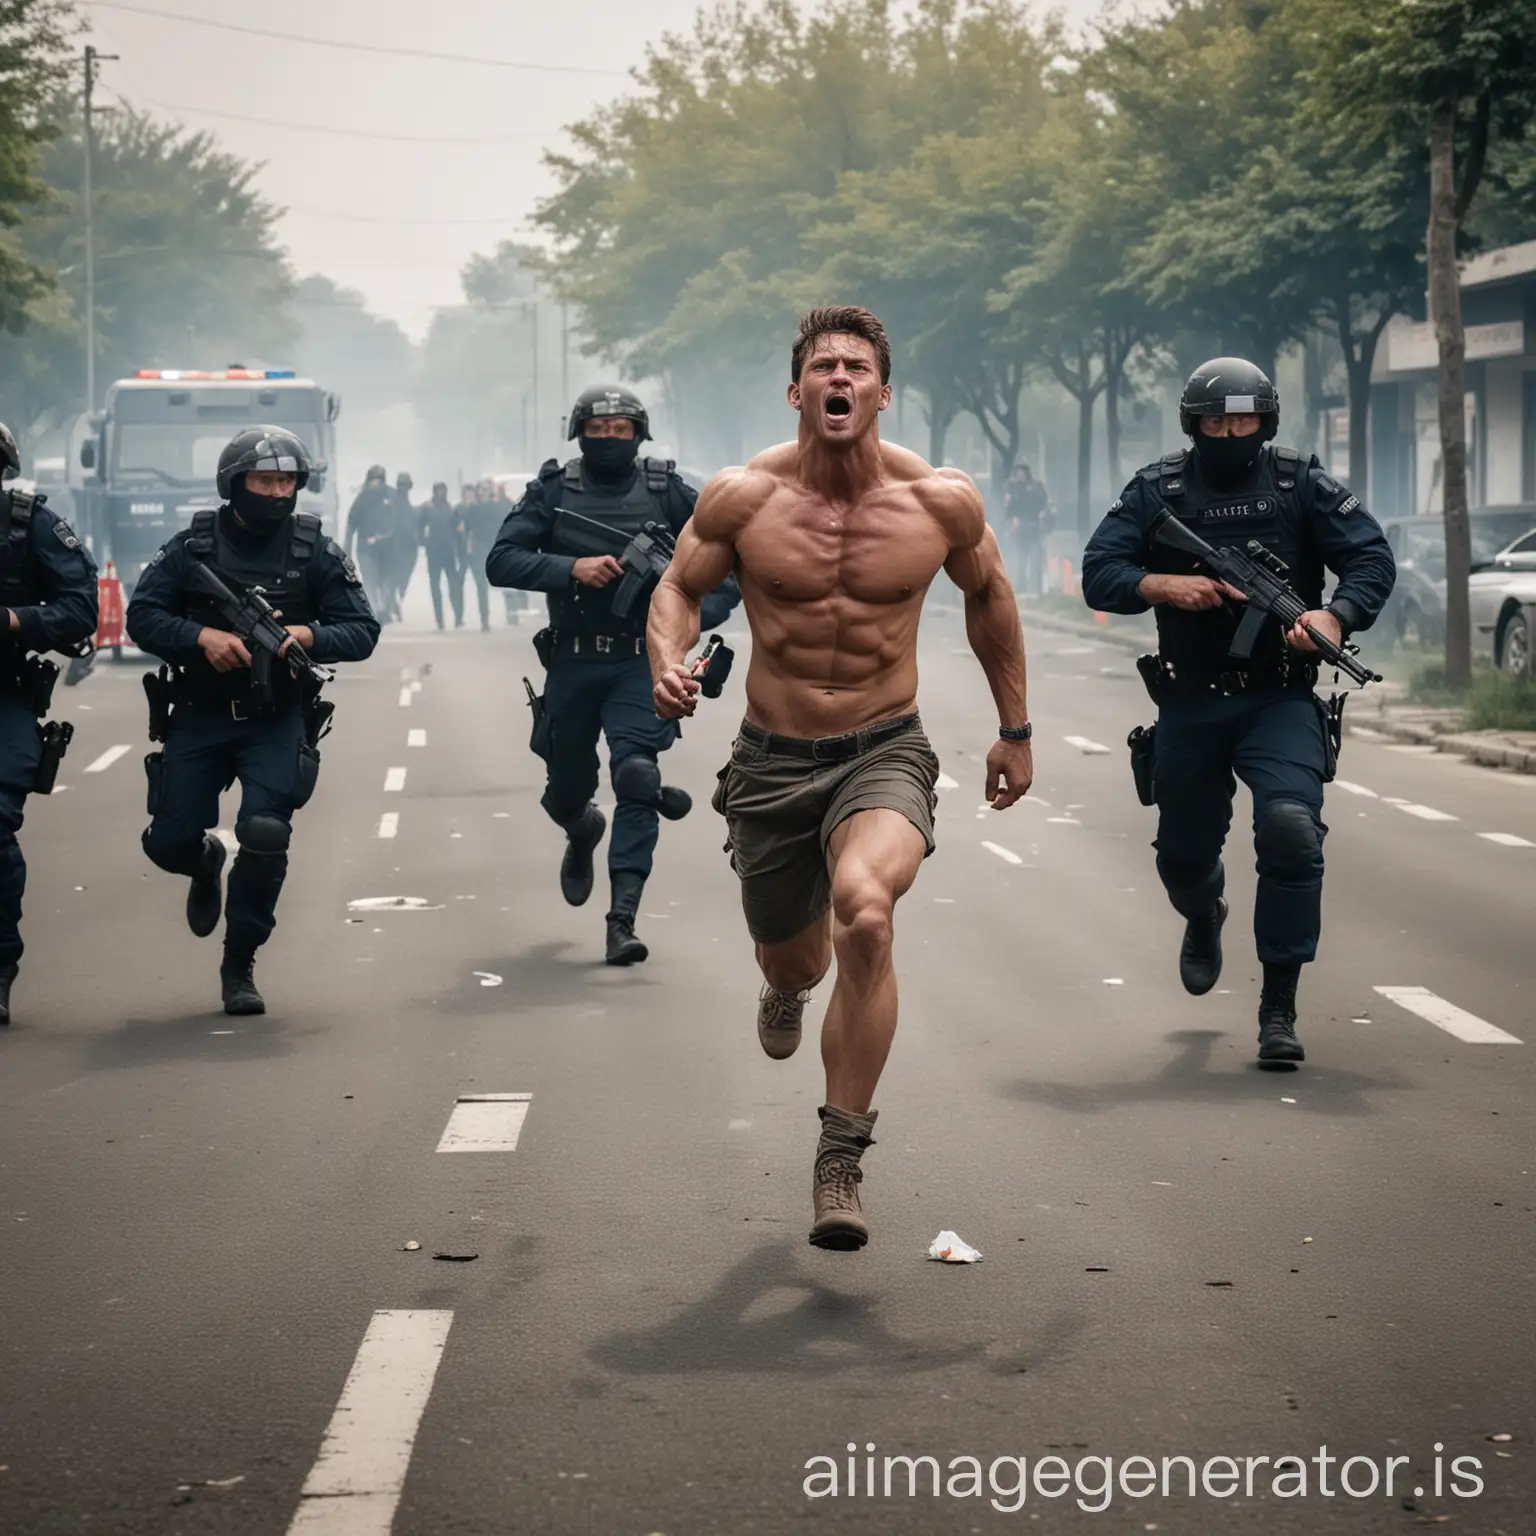 the muscular man was chased by several policemen with guns. The muscular man ran while smoking and playing games